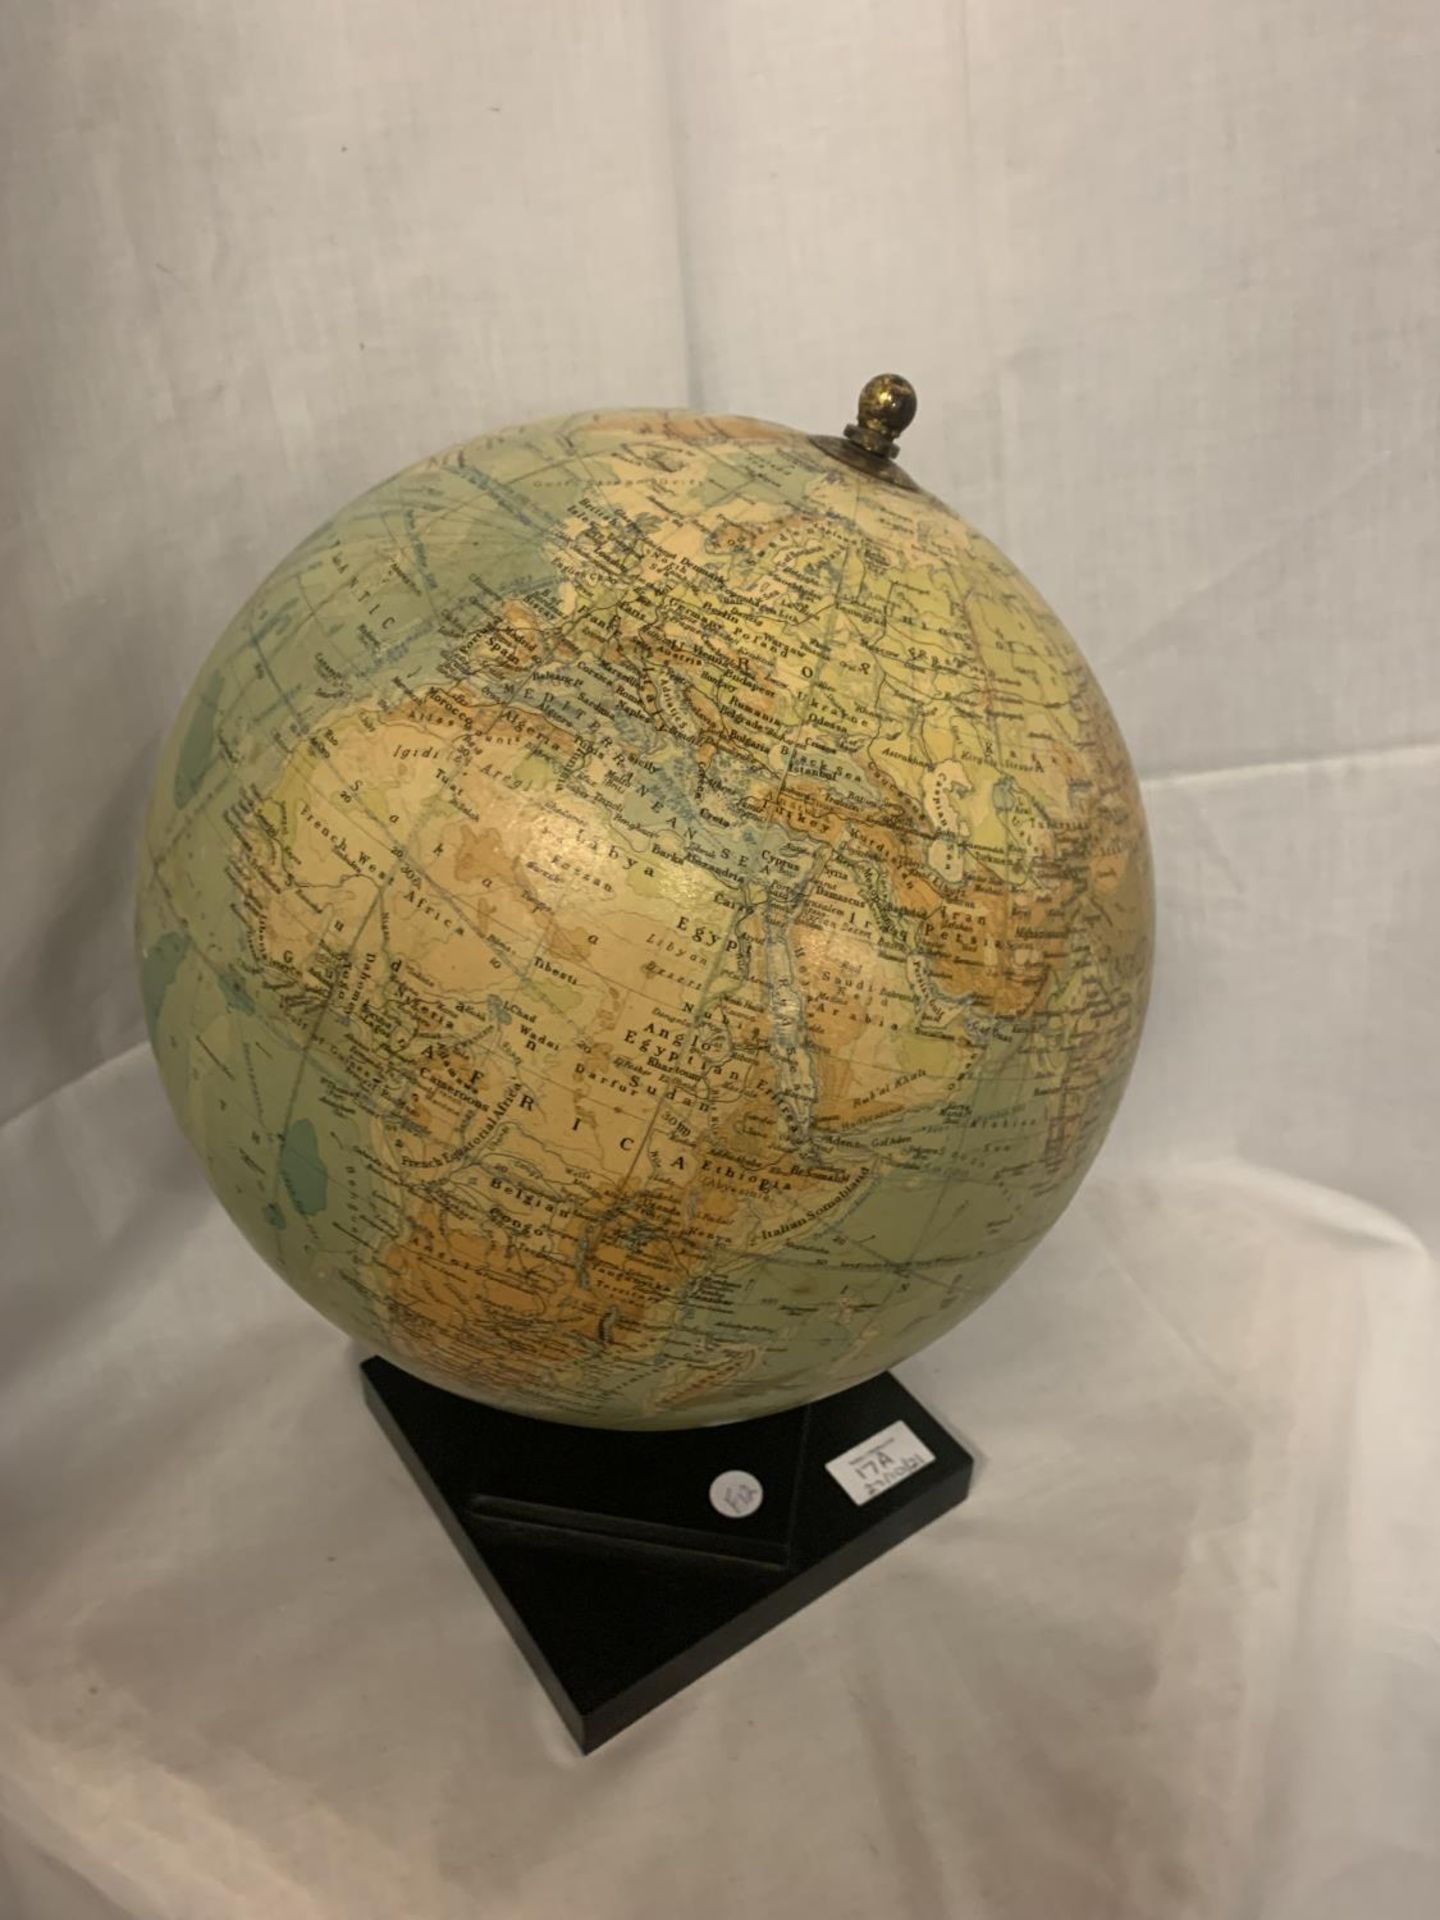 A PHILLIPS (LONDON) 12" TERRESTRIAL GLOBE 1981 - Image 3 of 3